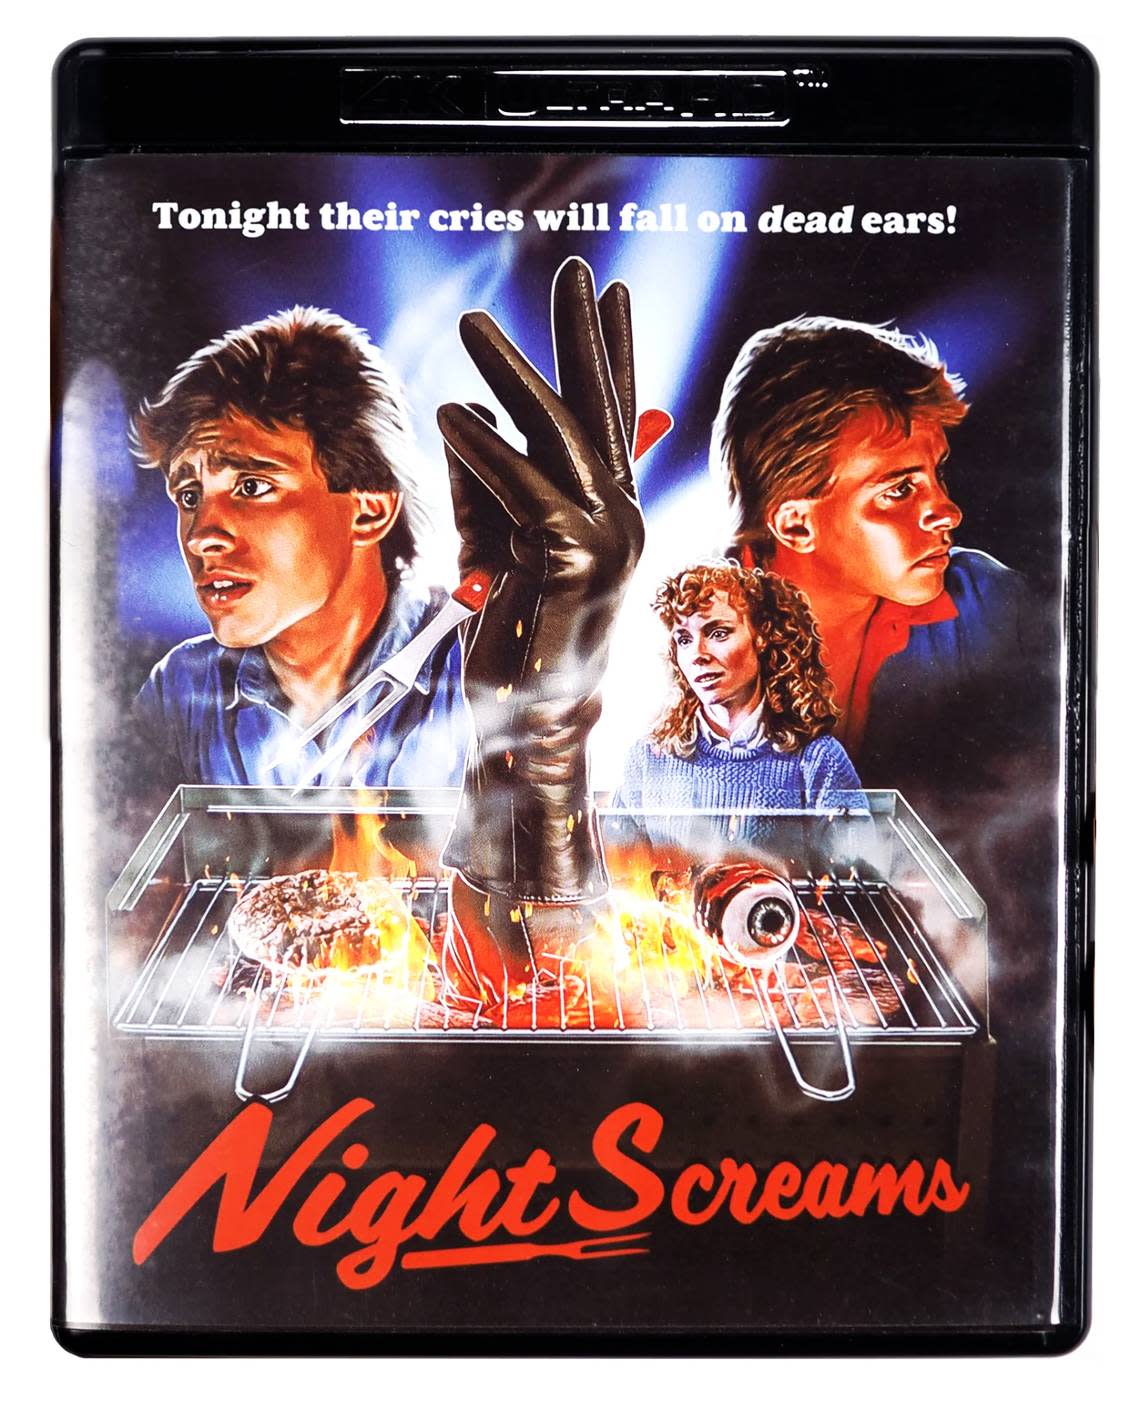 The rerelease of “Night Screams” will be available for purchase from vinegarsyndrome.com beginning July 1.